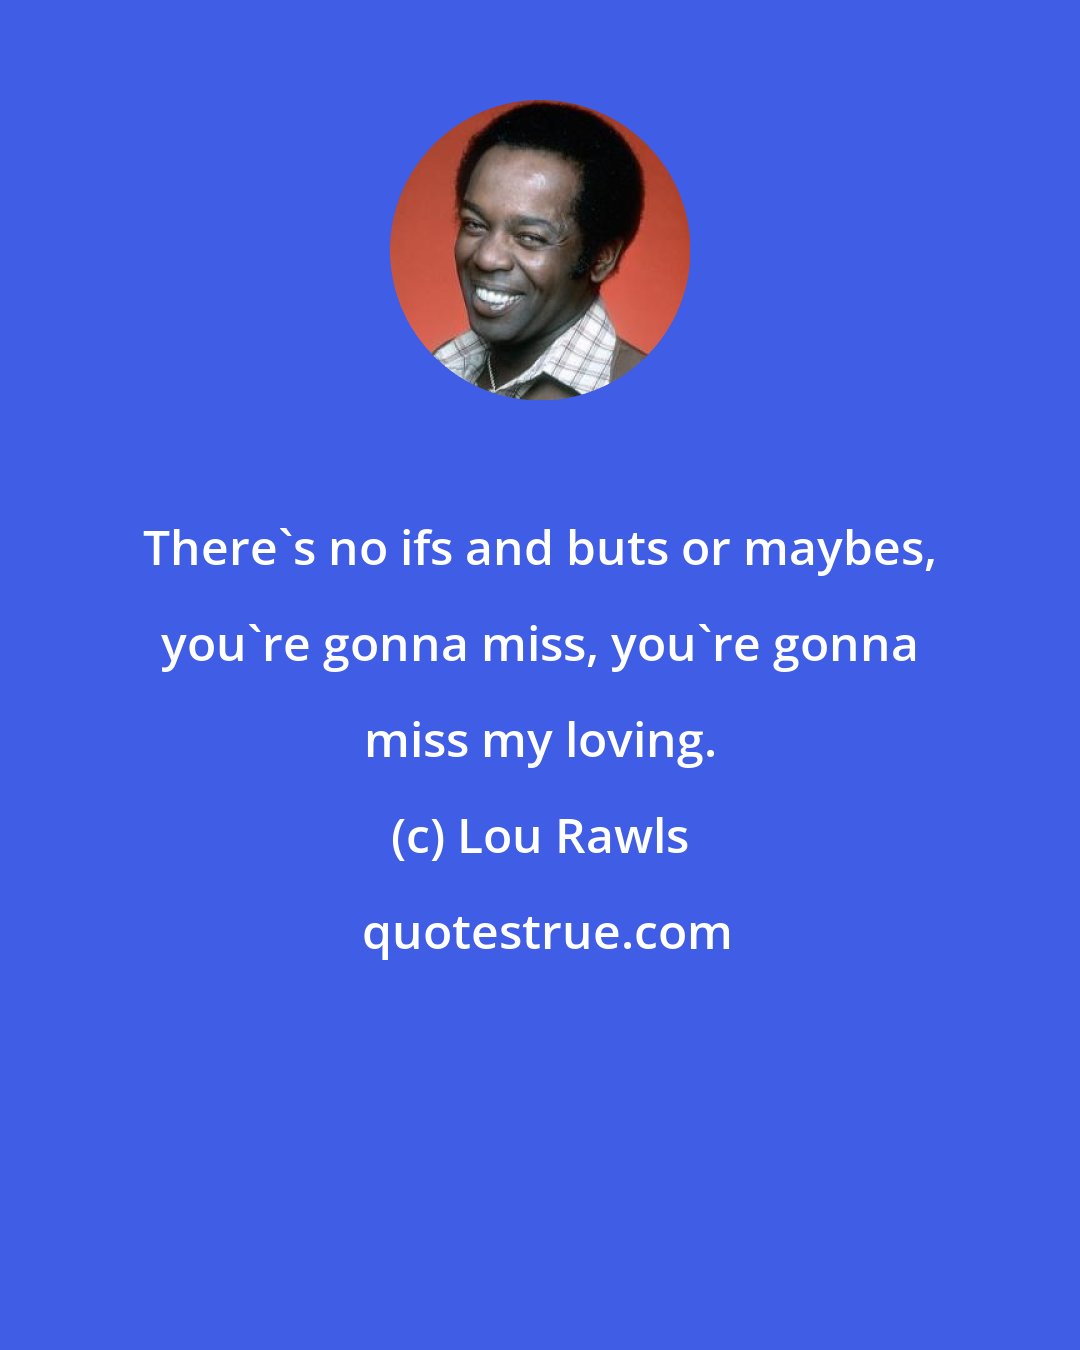 Lou Rawls: There's no ifs and buts or maybes, you're gonna miss, you're gonna miss my loving.